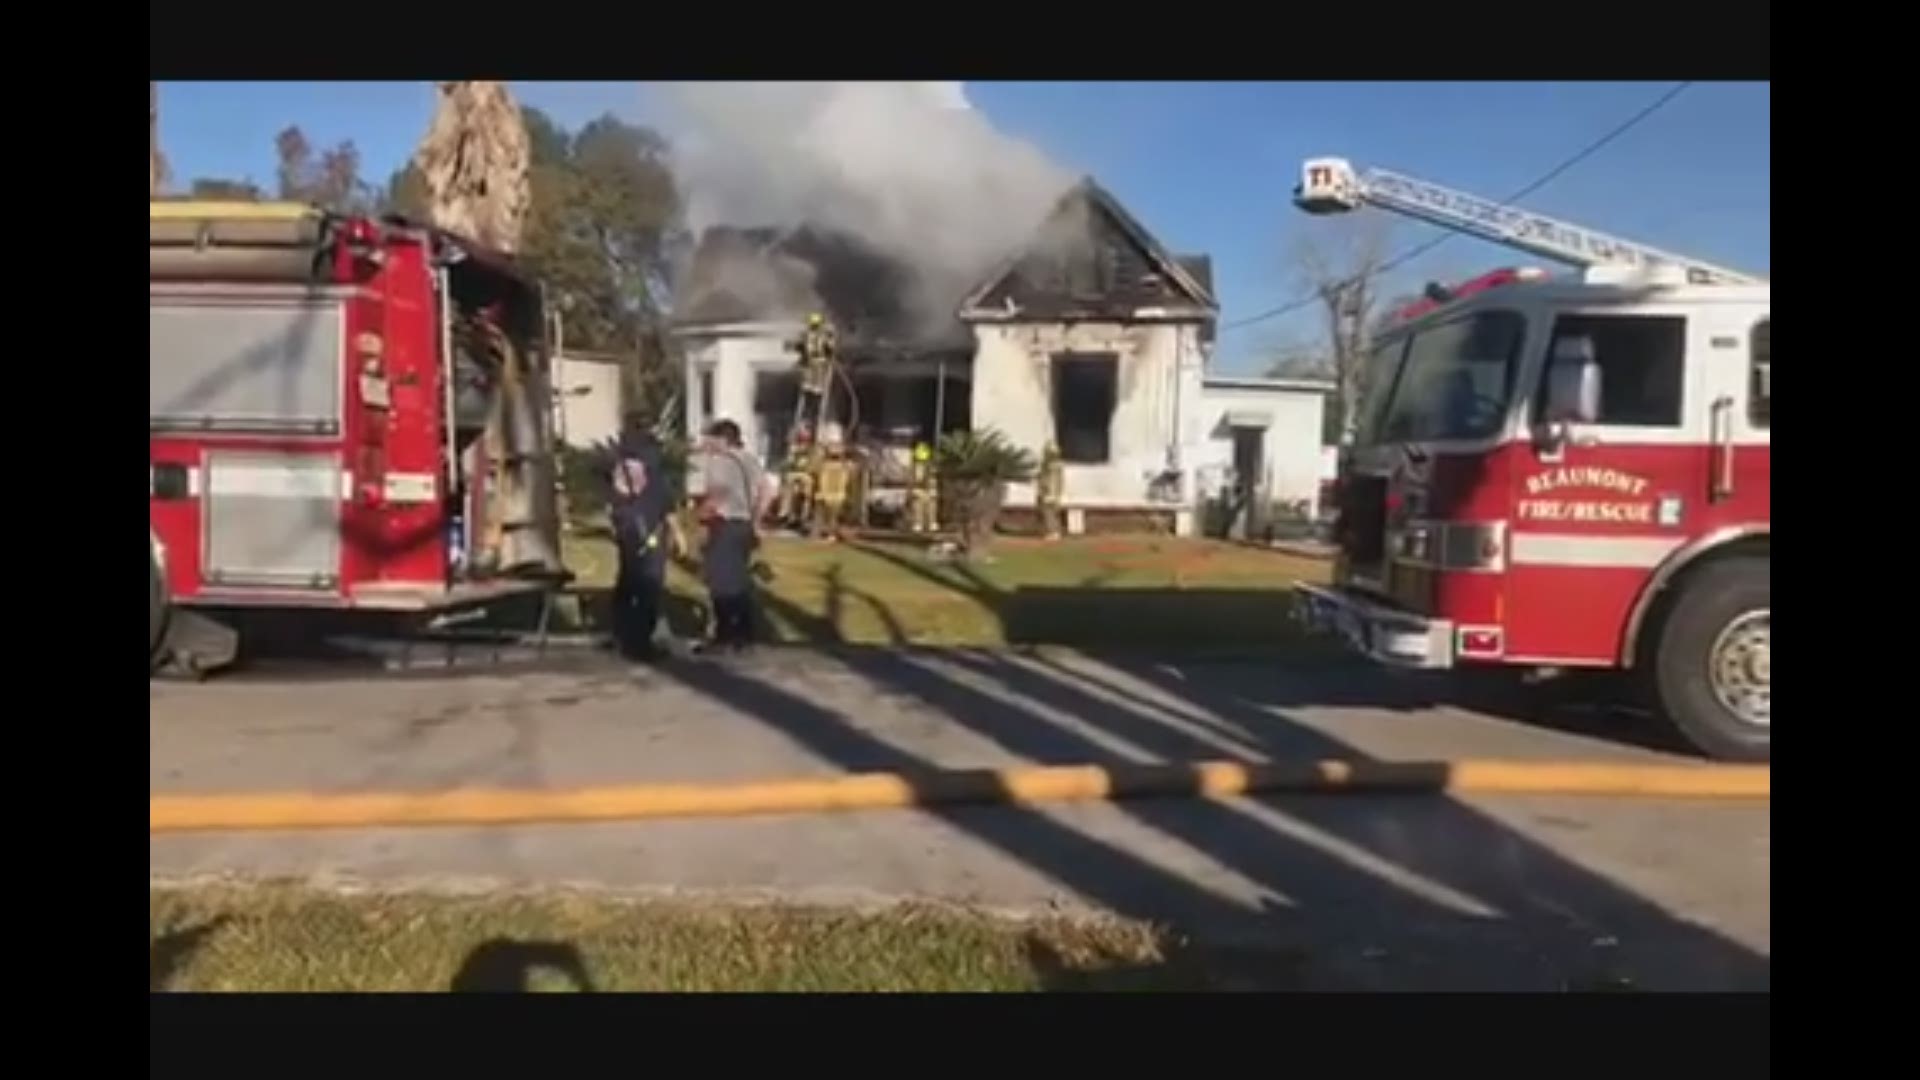 Man killed in north Beaumont house fire